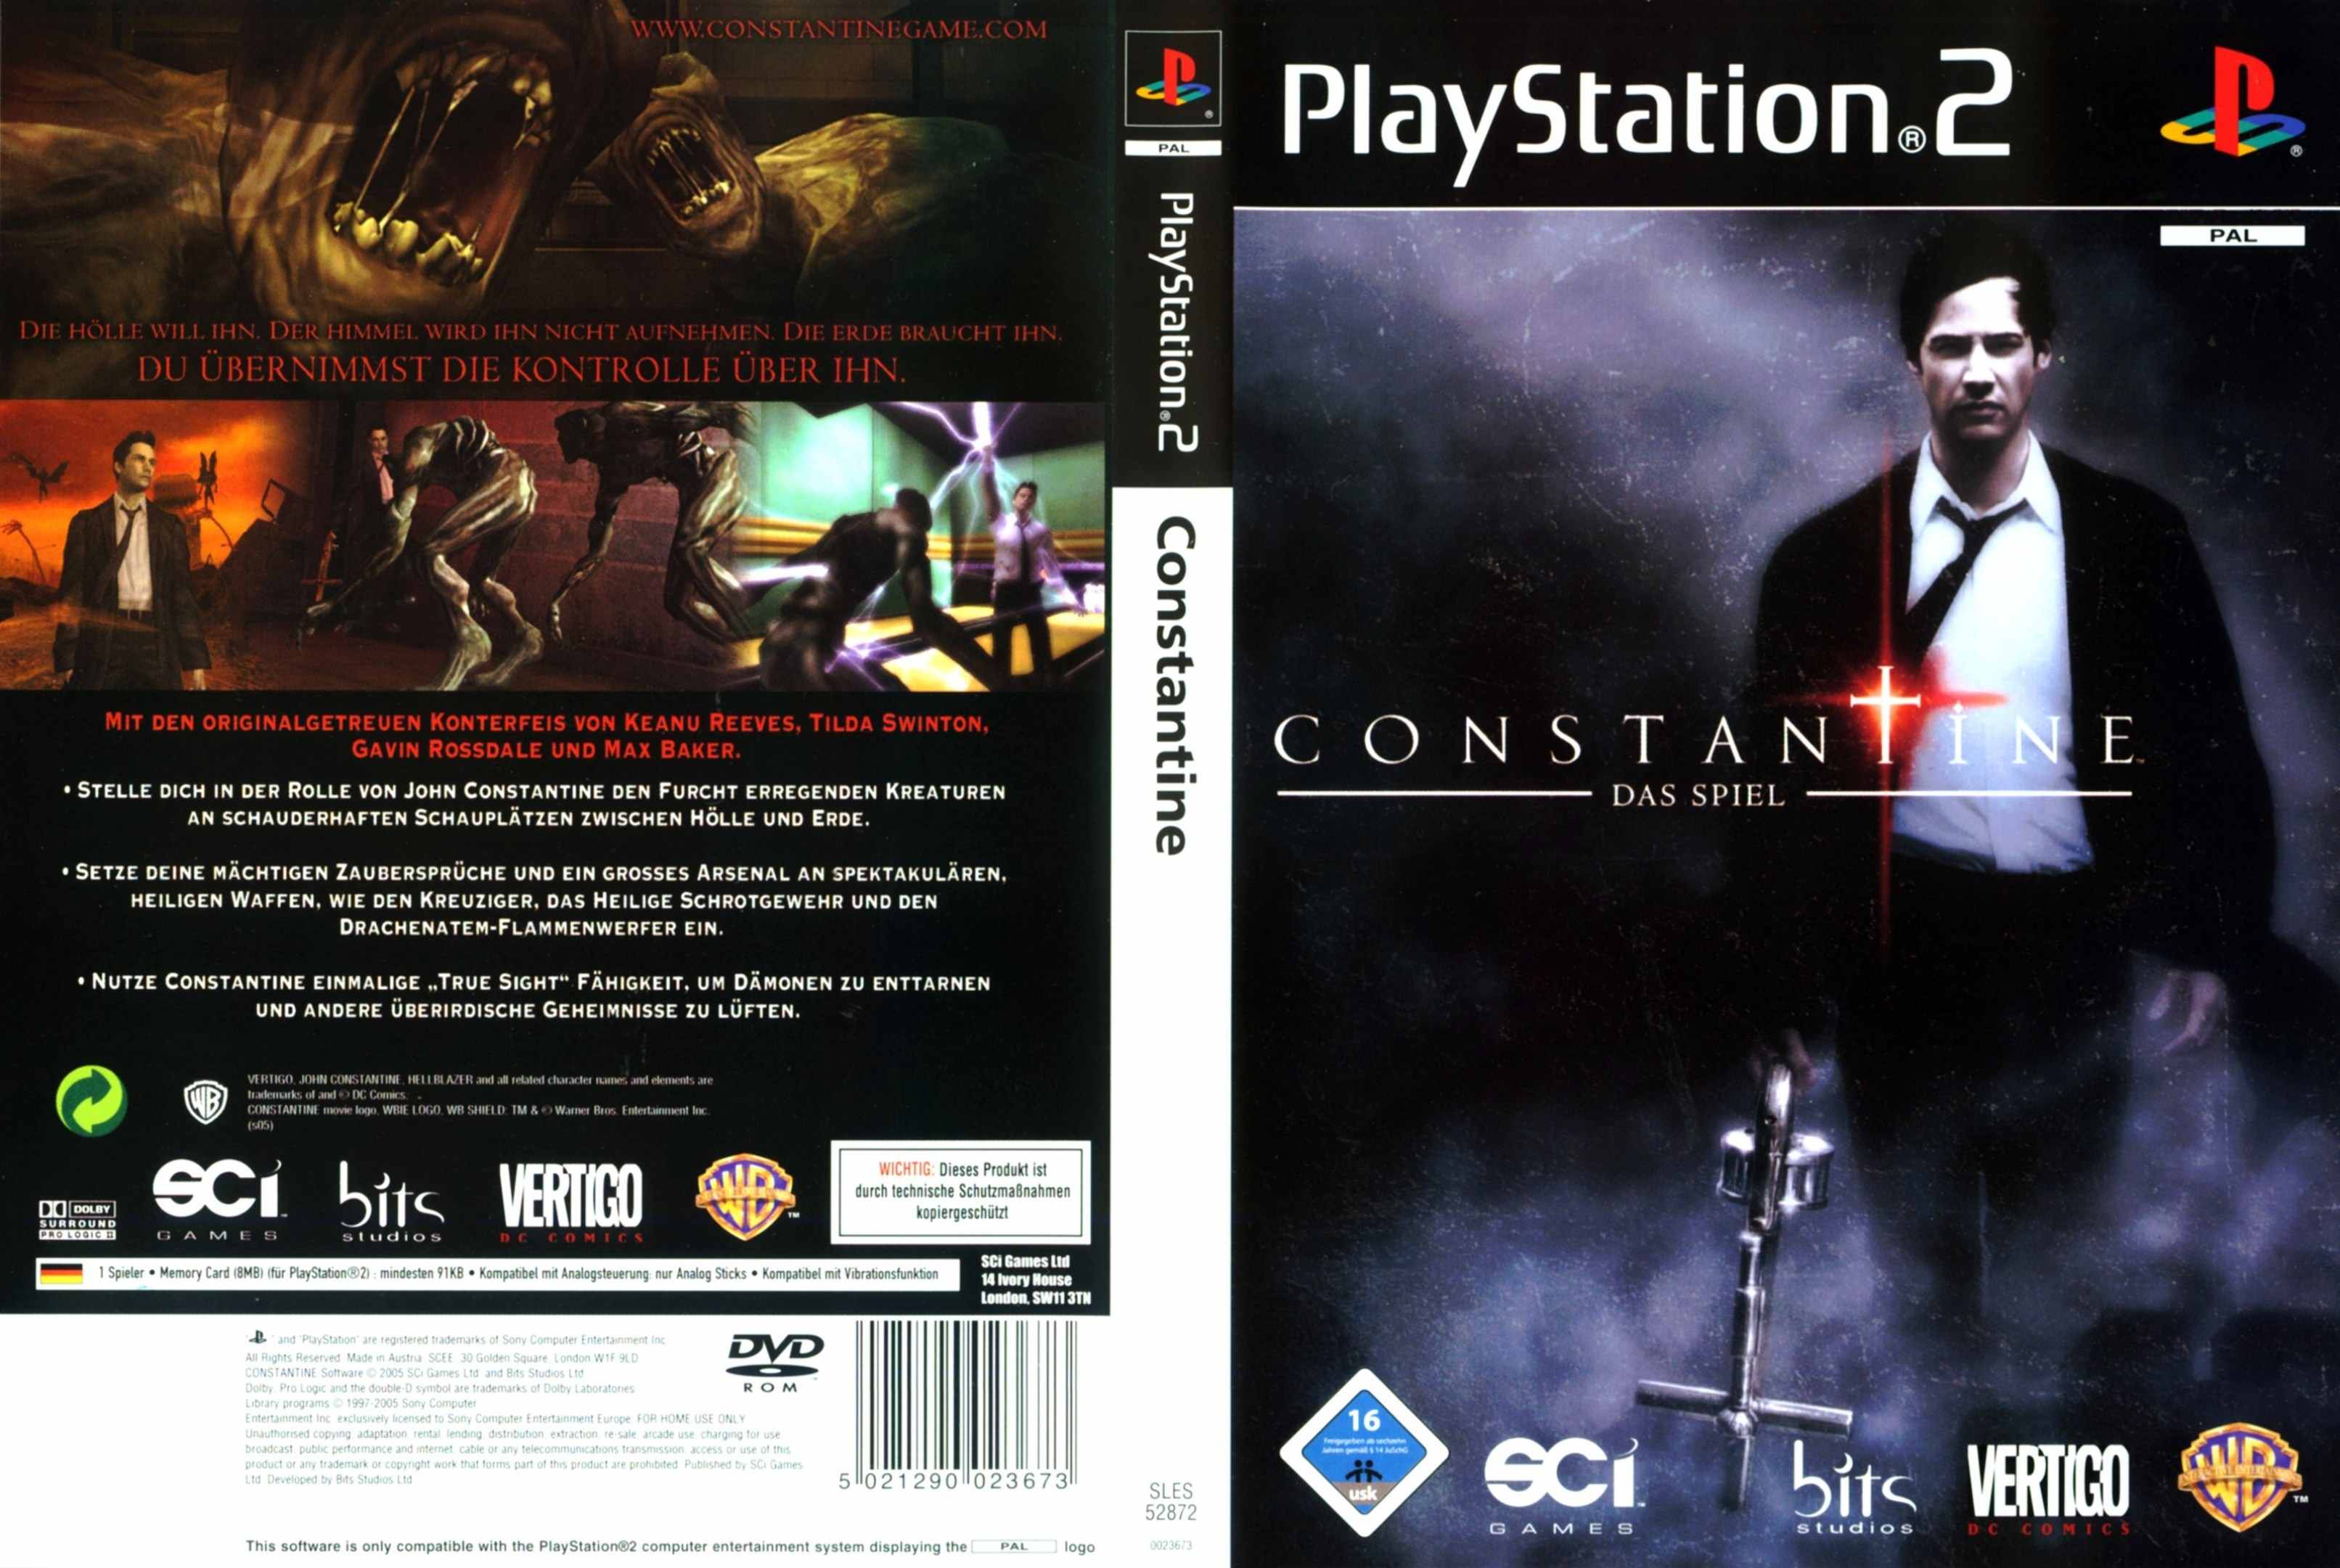 constantine das spiel ps2 dvd, Playstation 2 Covers, Cover Century